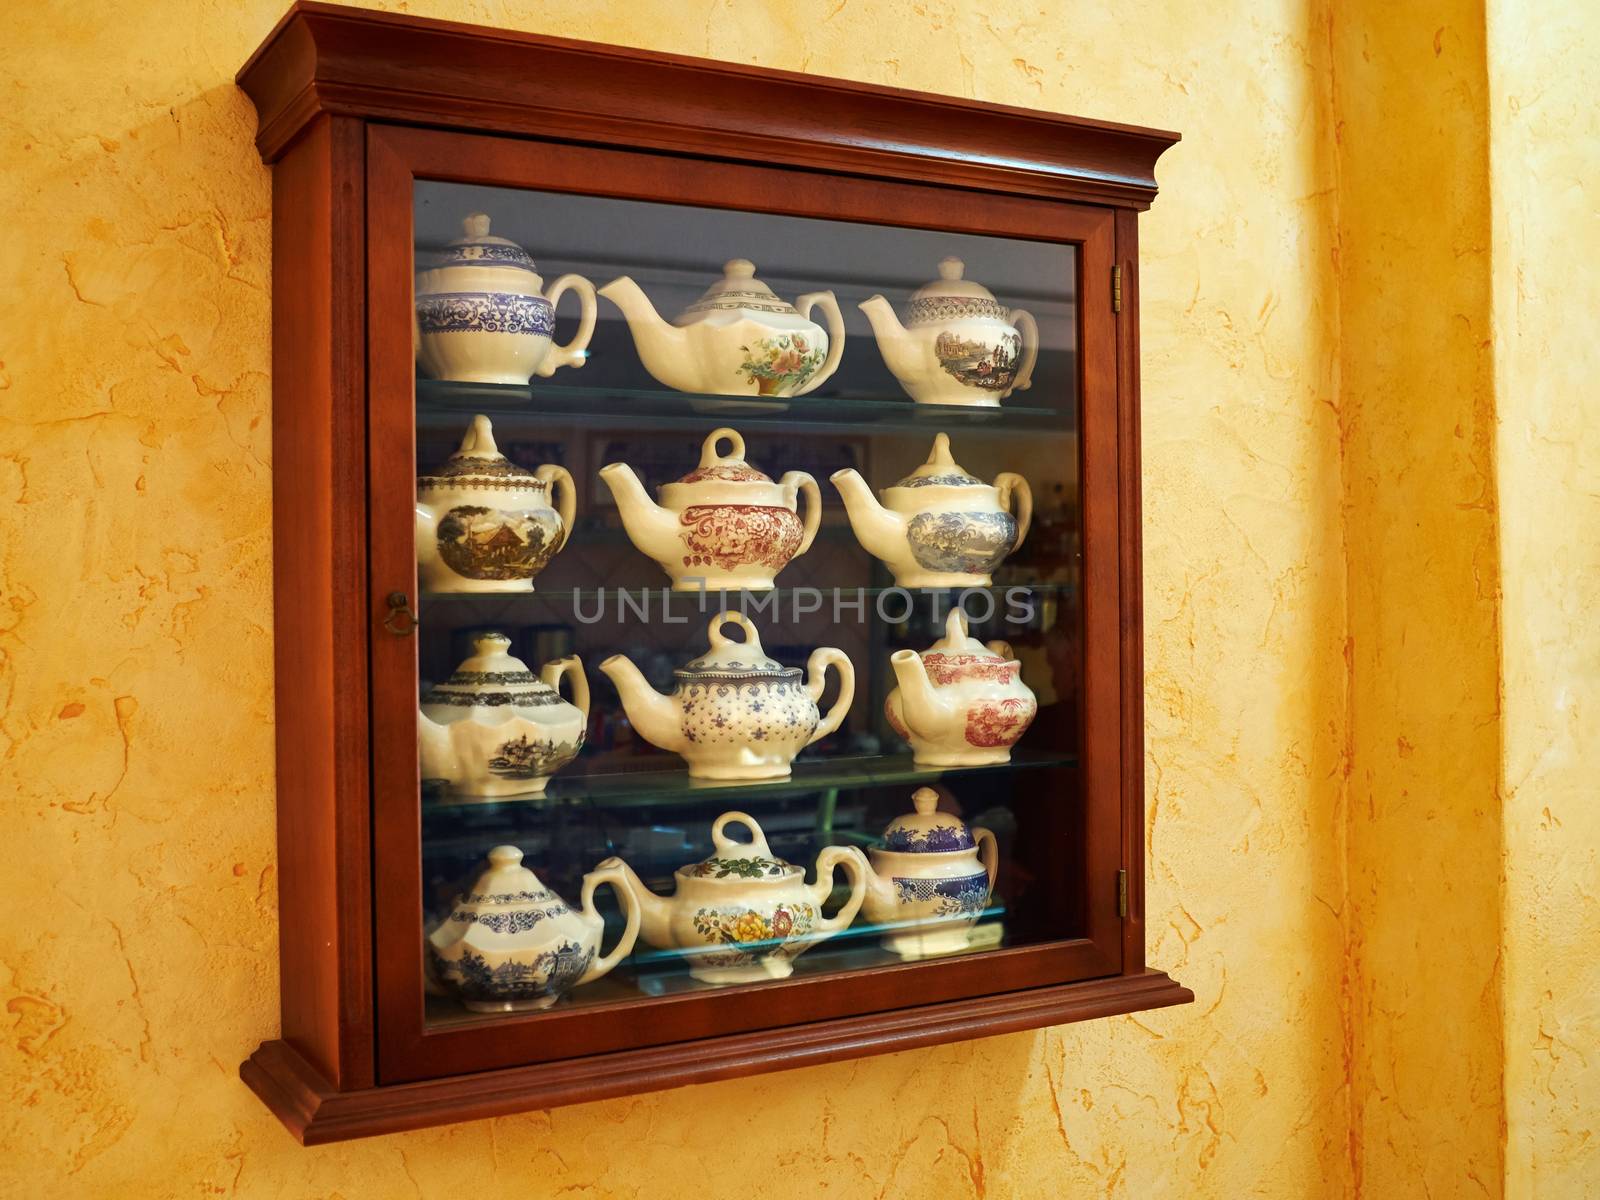 Collection of decorative classical design tea pot in a wooden display cabinet